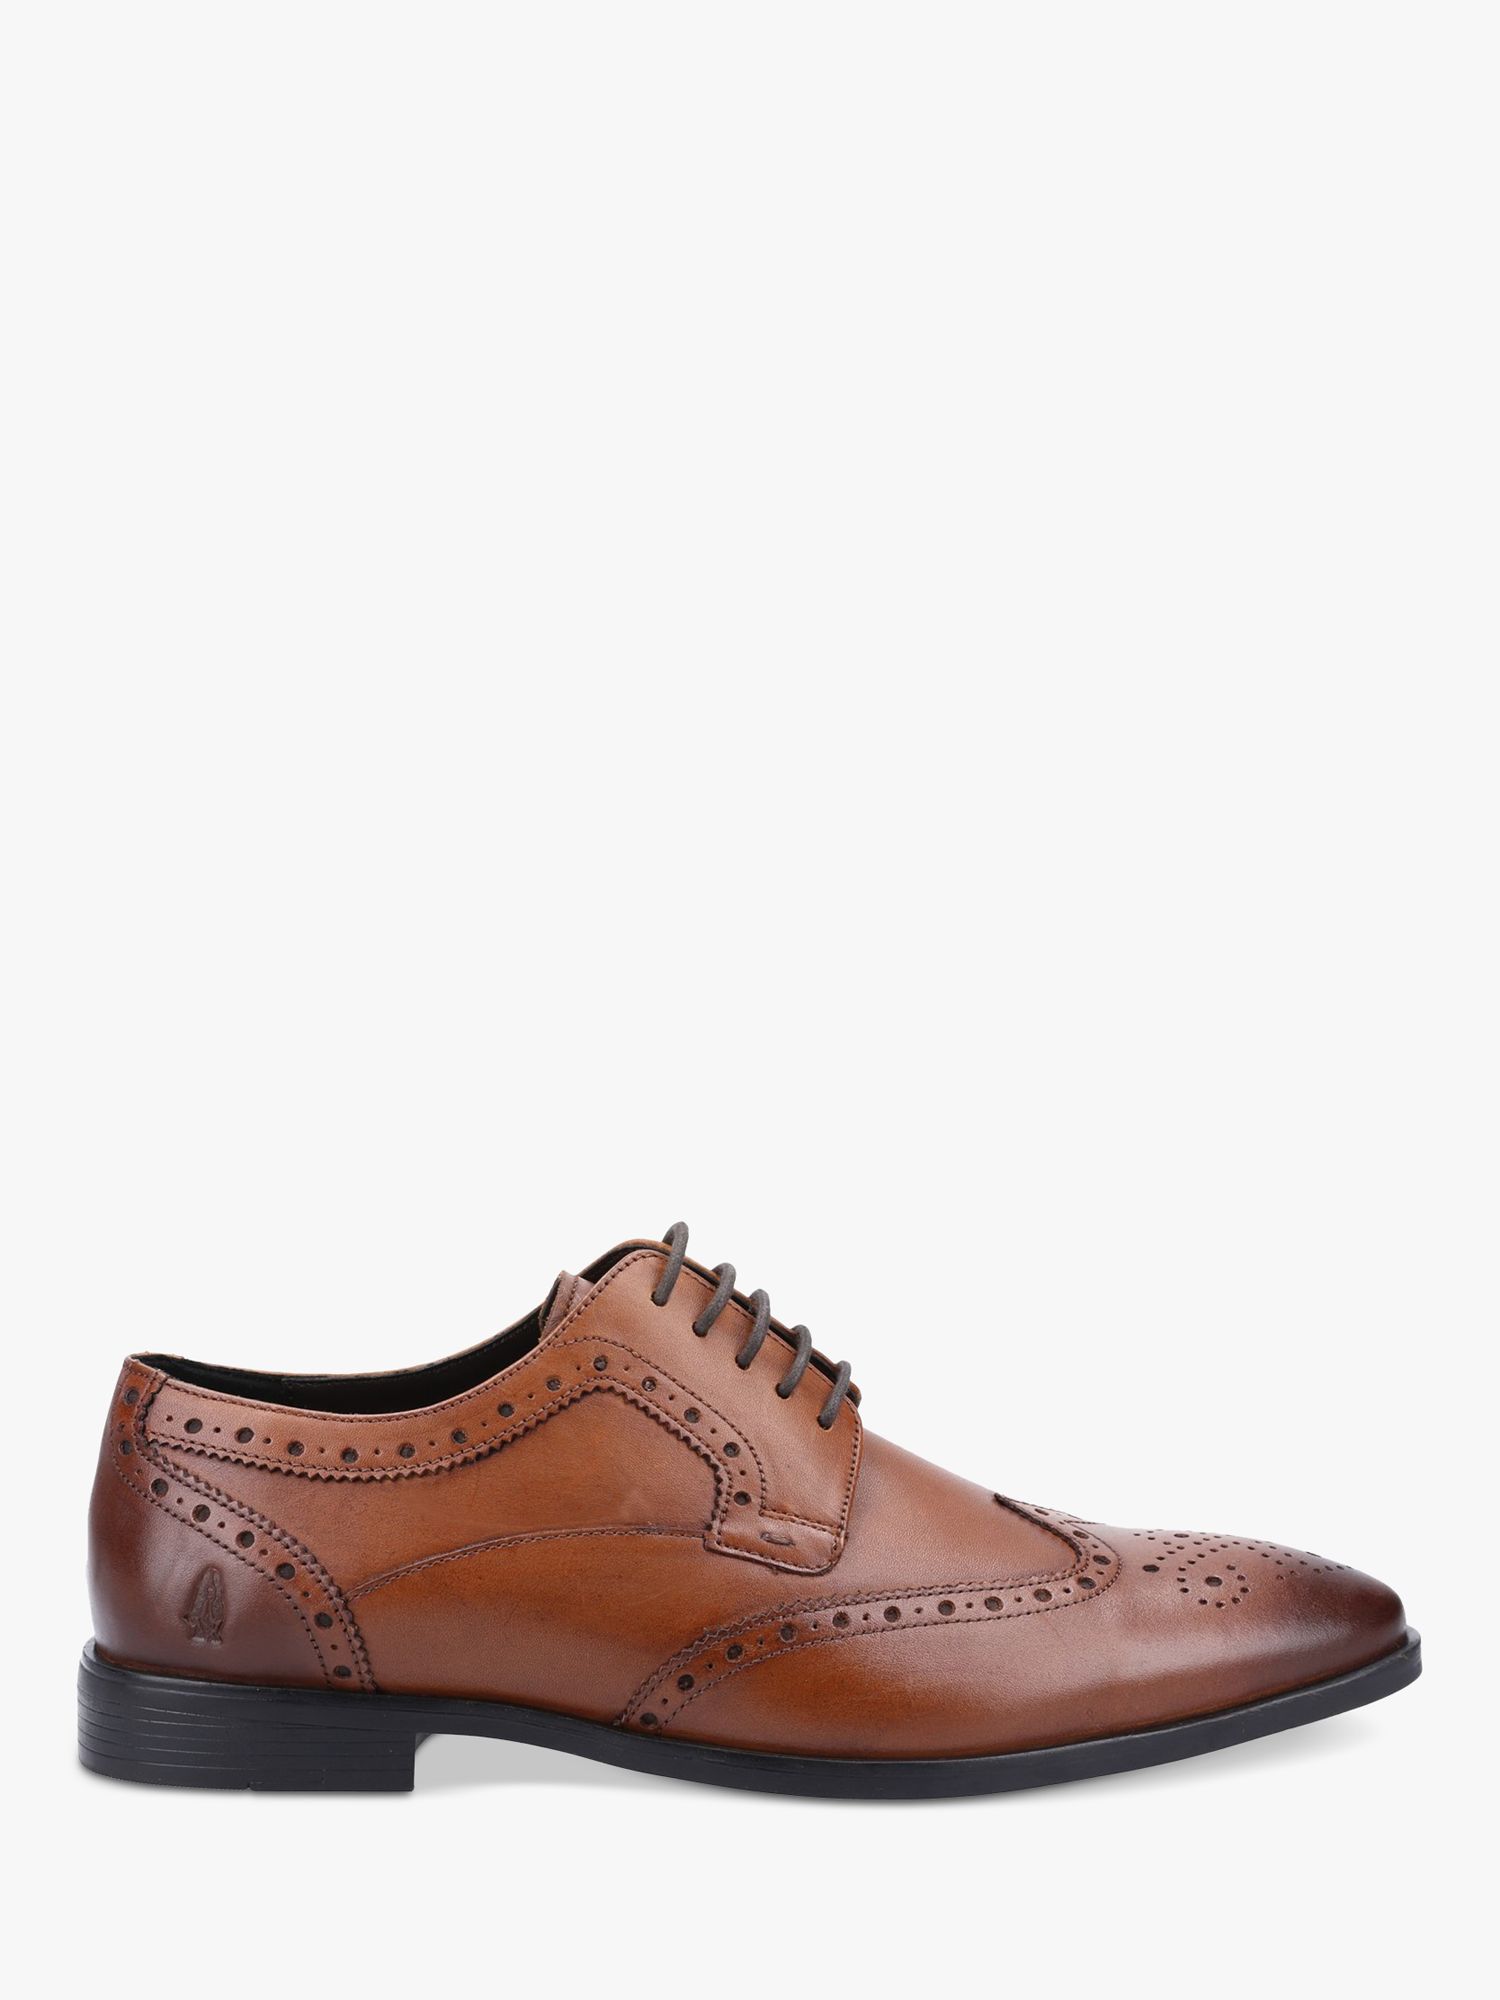 Hush Puppies Elliot Brogue Leather Shoes, Tan, 6